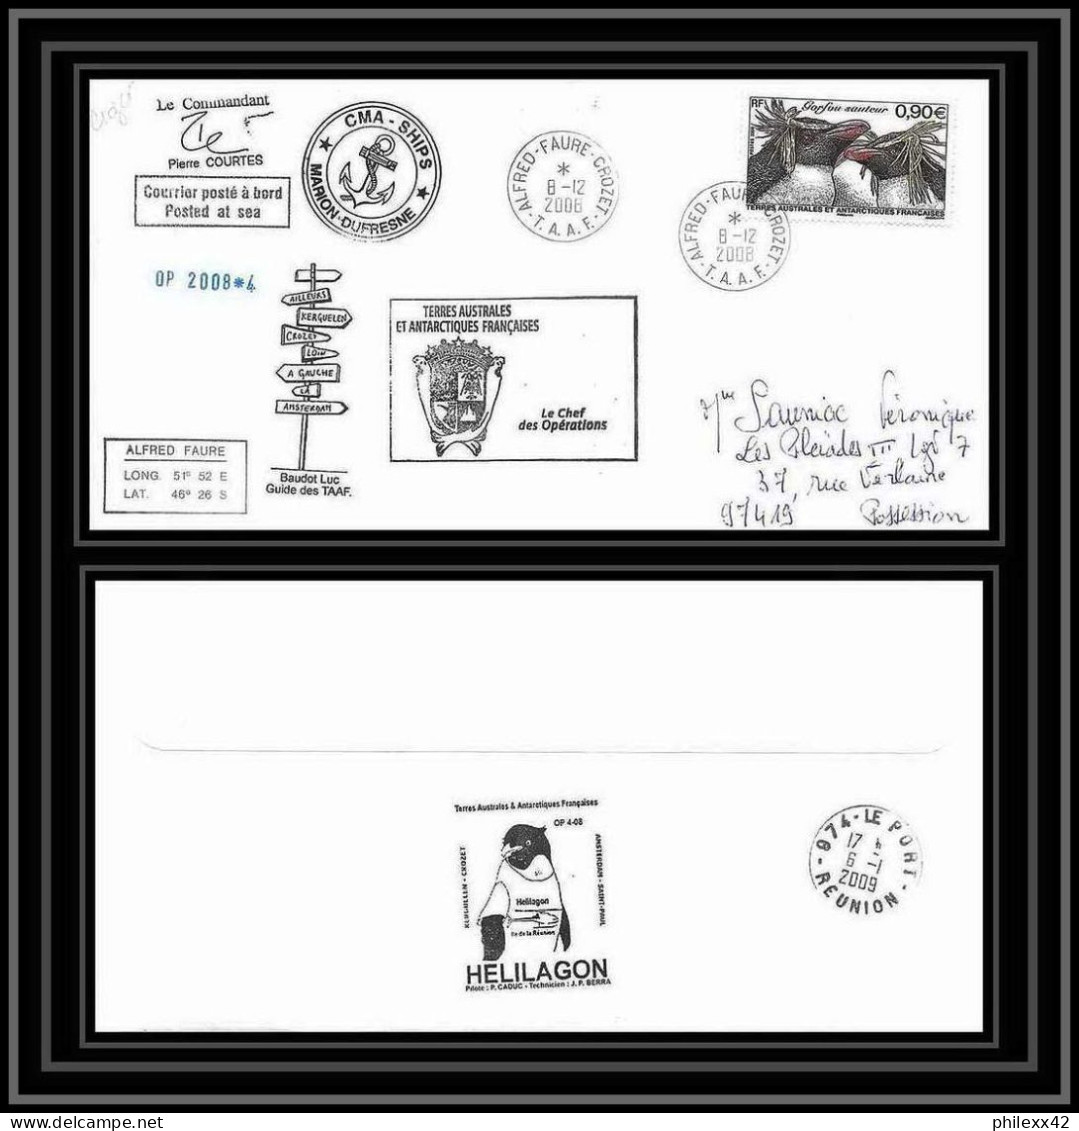 2862 ANTARCTIC Terres Australes TAAF Helilagon Lettre Cover Dufresne Signé Signed Op 2008/4 Crozet 8/12/2008 N°502 - Helicópteros